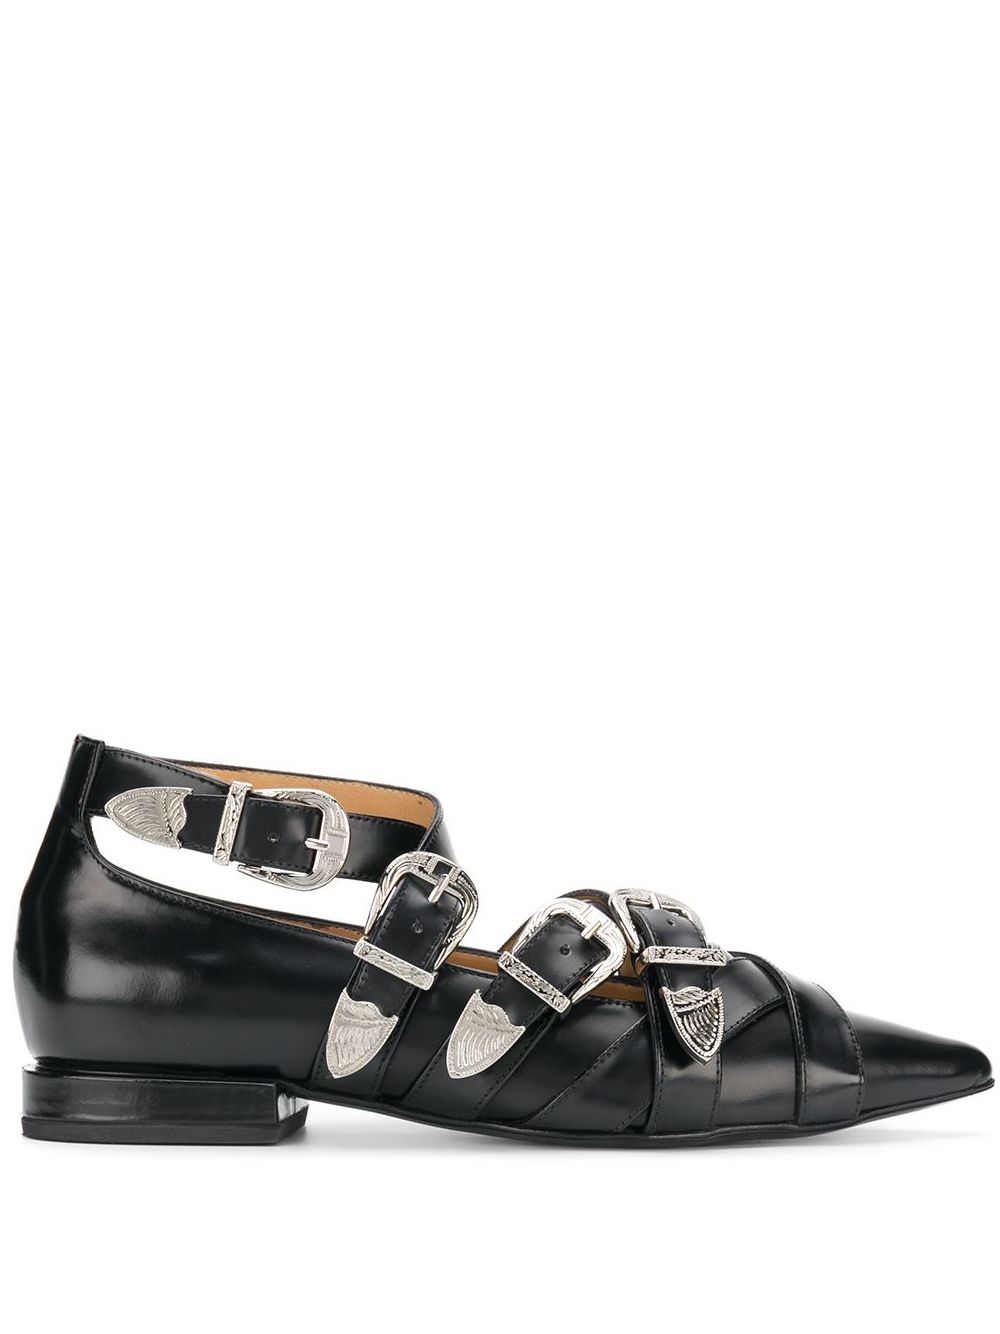 Toga Pulla buckled pointed loafers - Black von Toga Pulla